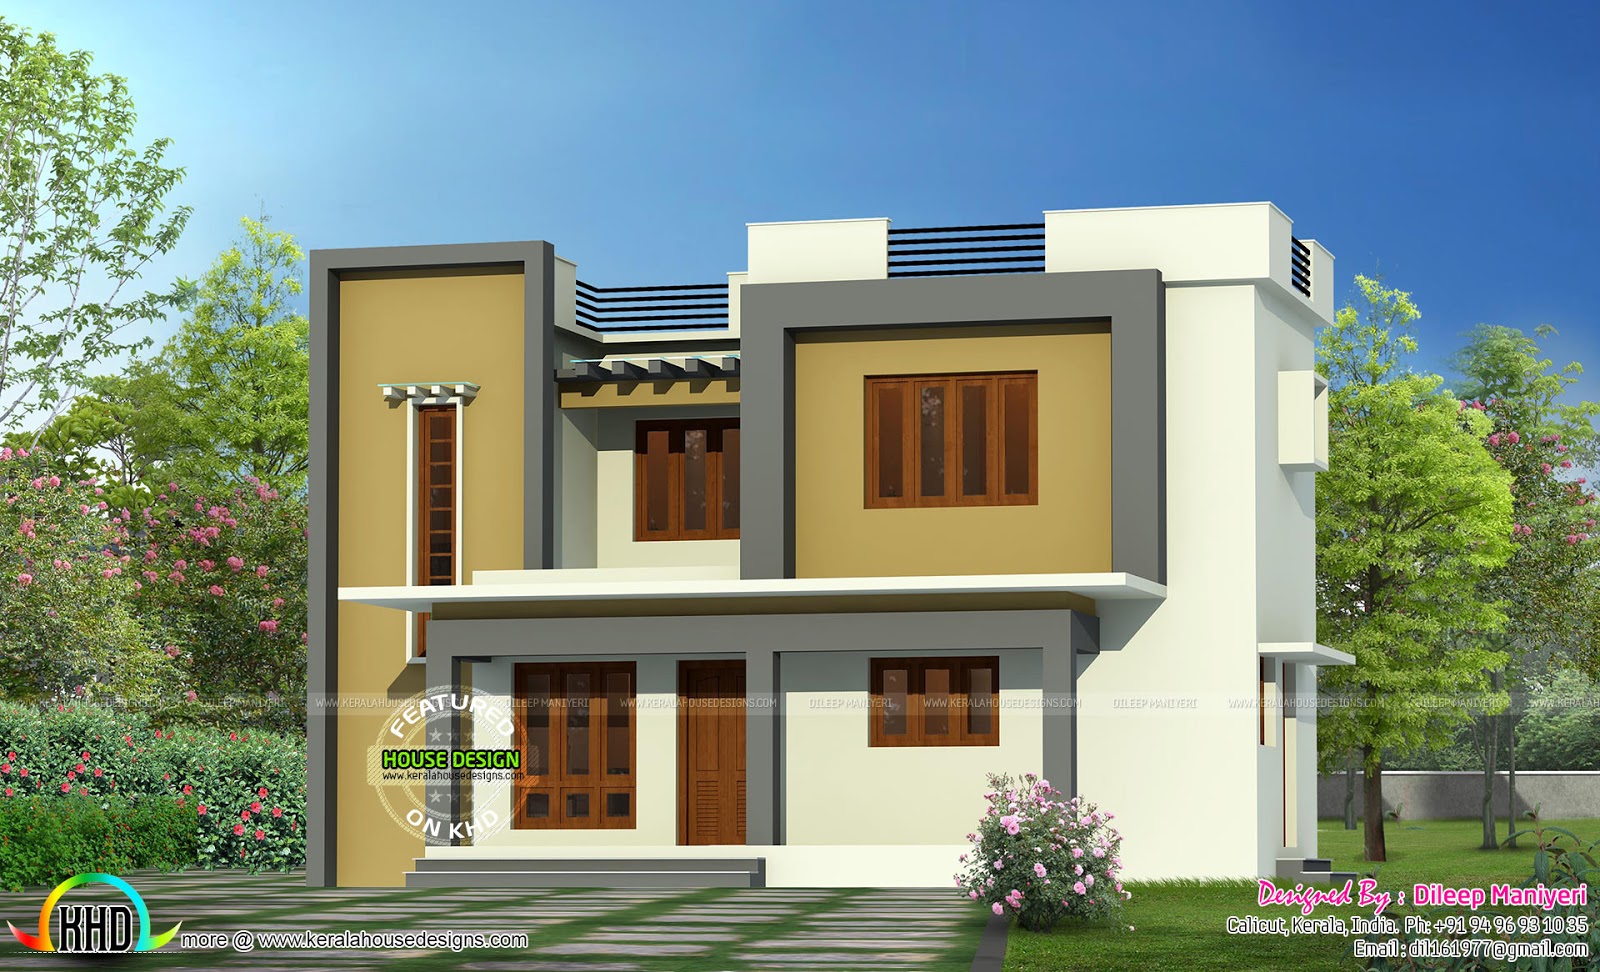  Simple  flat  roof  home architecture Kerala home design 